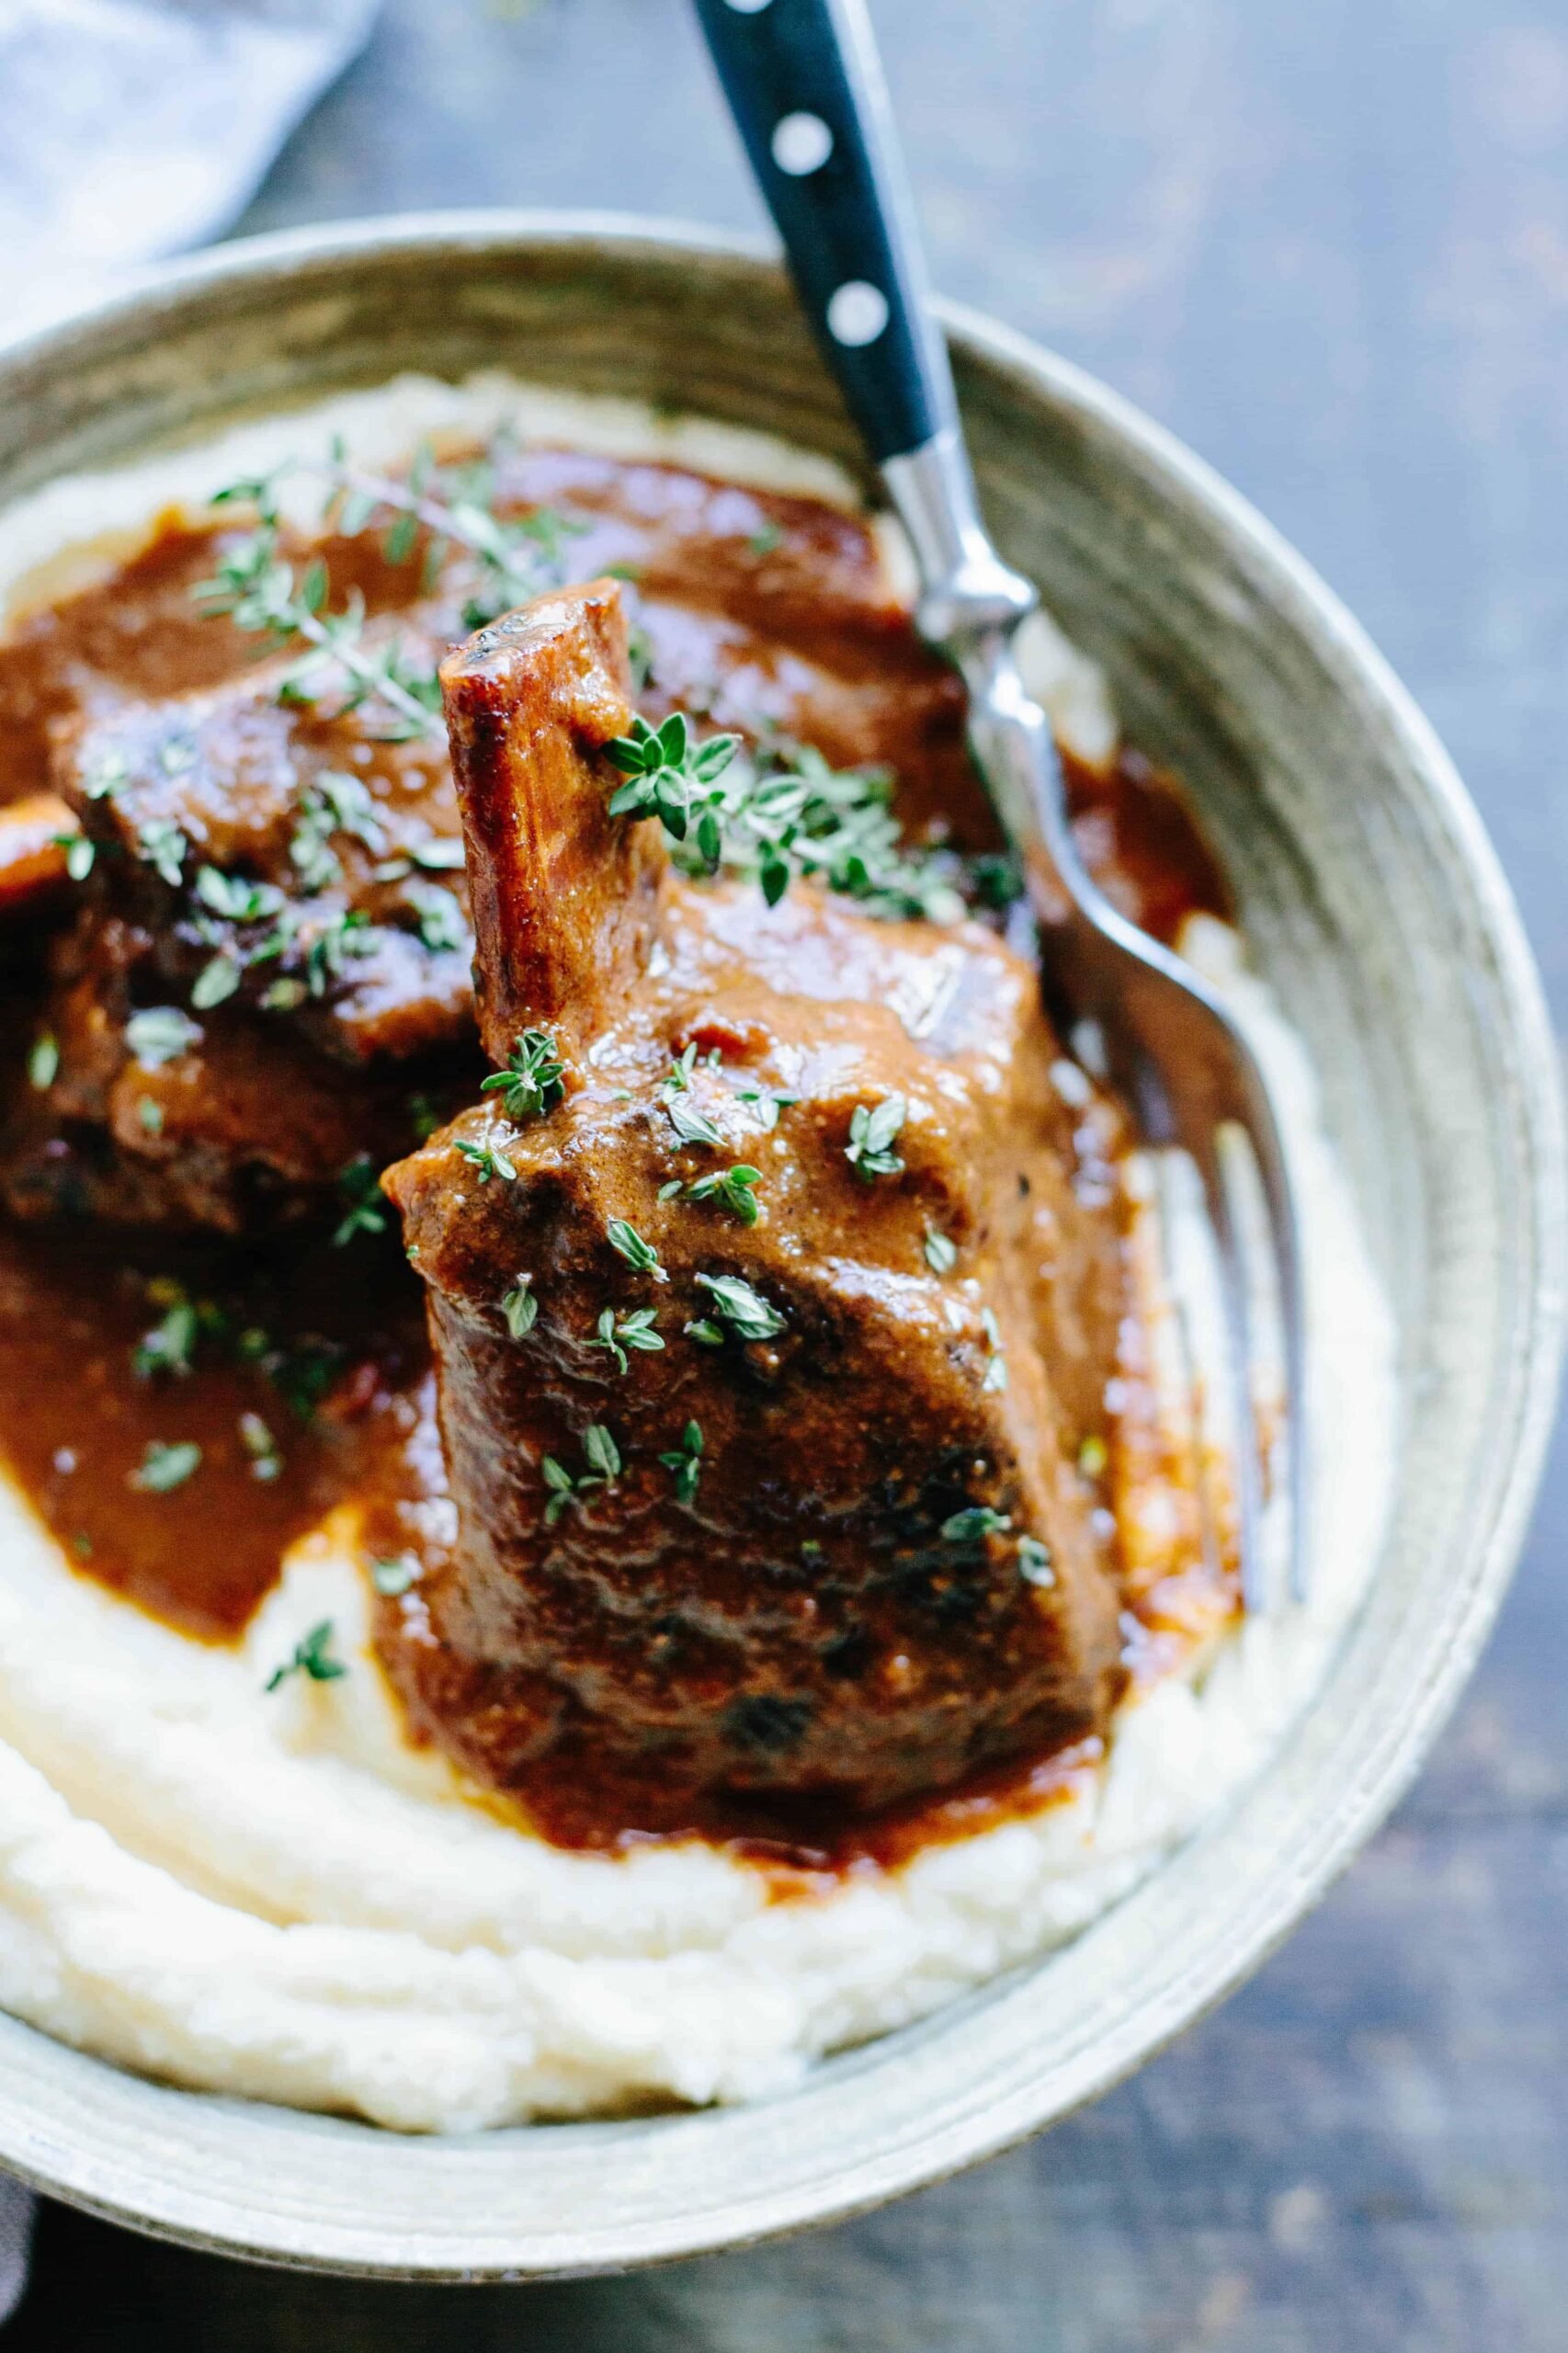  The rich flavors from the wine complement the melt-in-your-mouth beef.